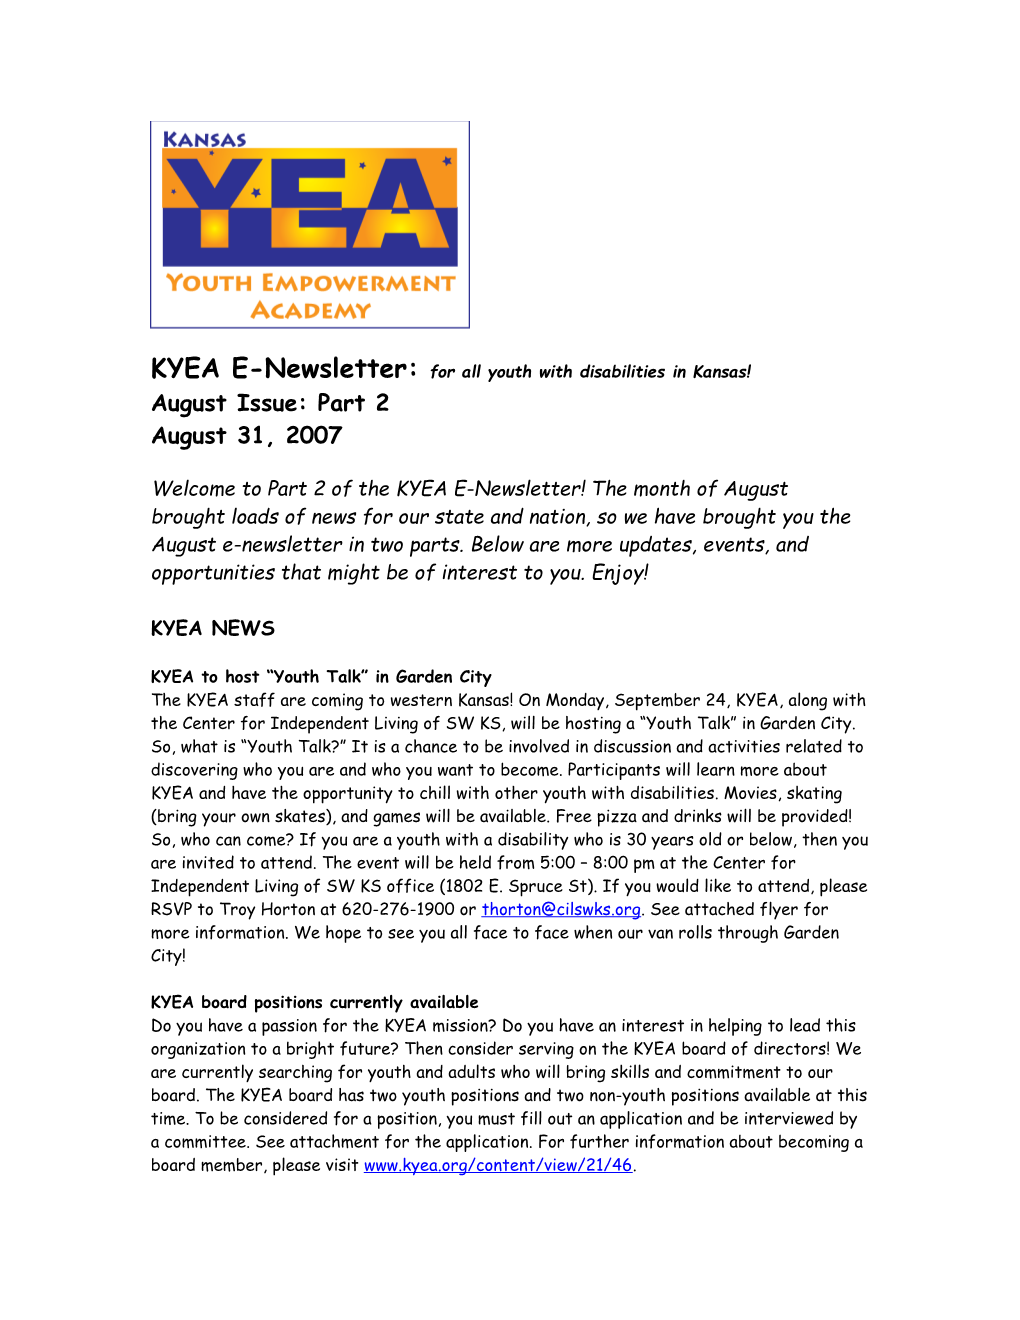 KYEA E-Newsletter:For All Youth with Disabilities in Kansas!